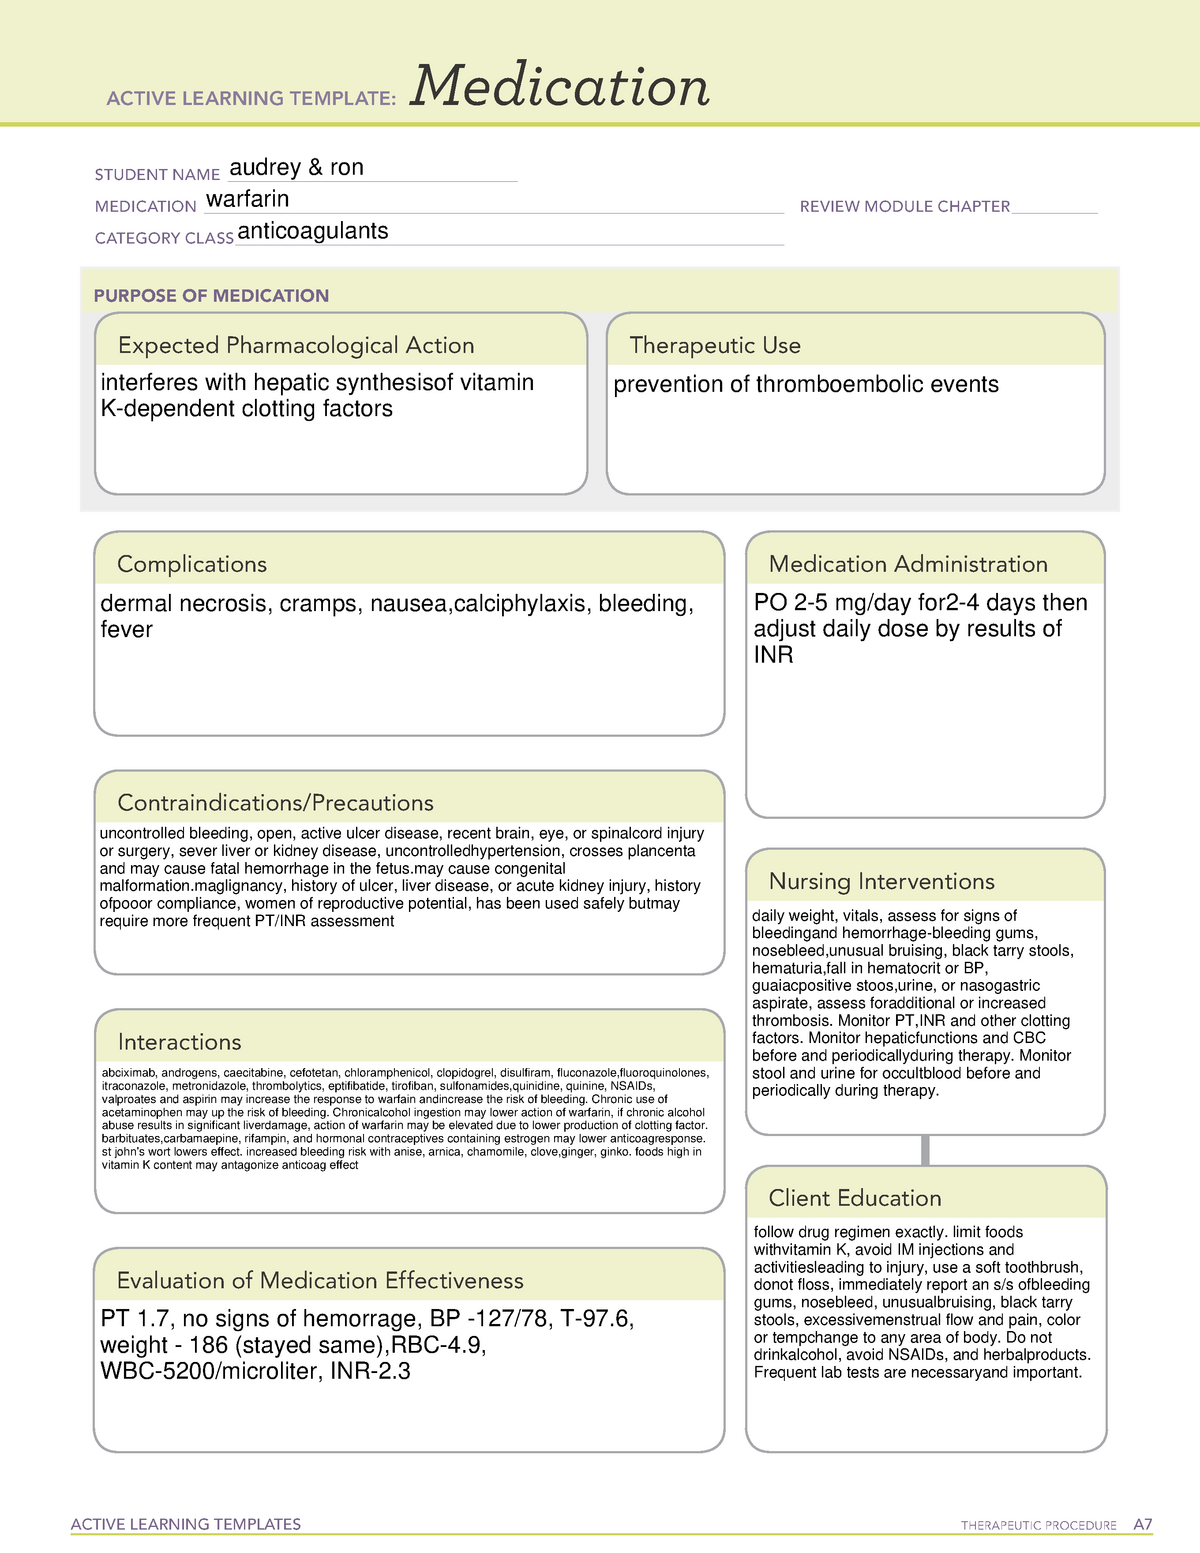 Active Learning Template medication (2) warfarin (2) ACTIVE LEARNING